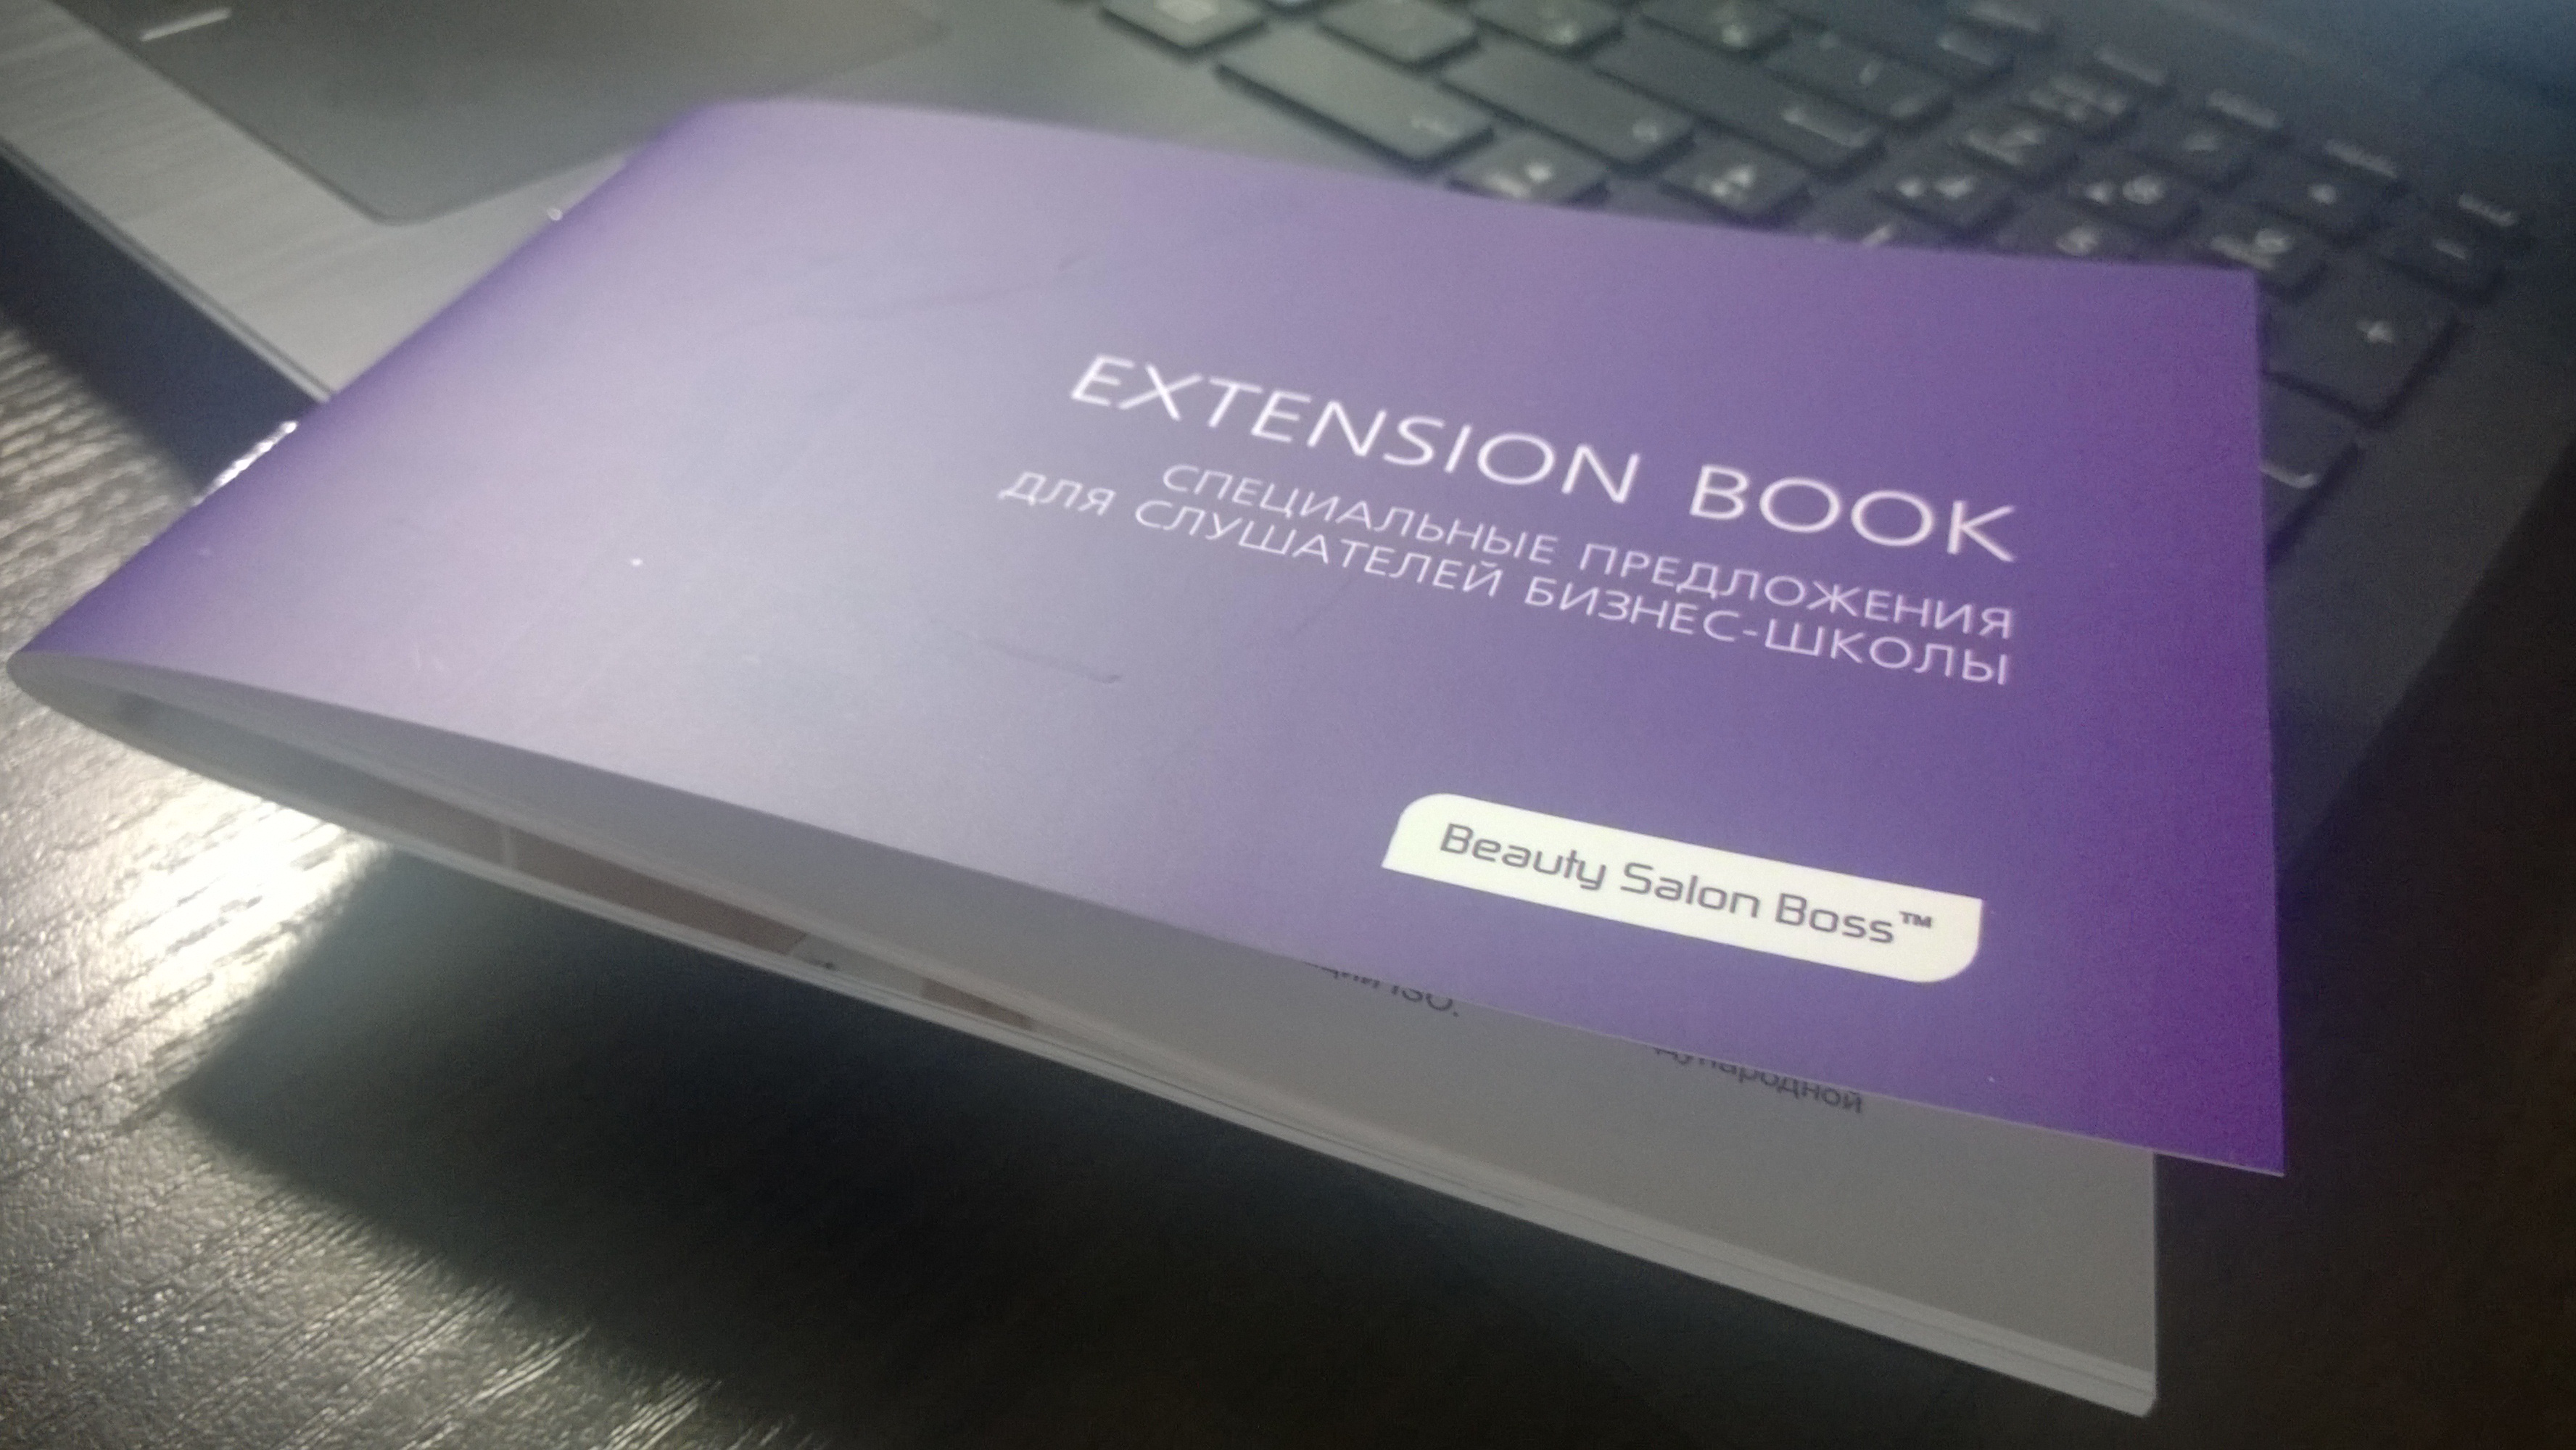 EXTENSION BOOK